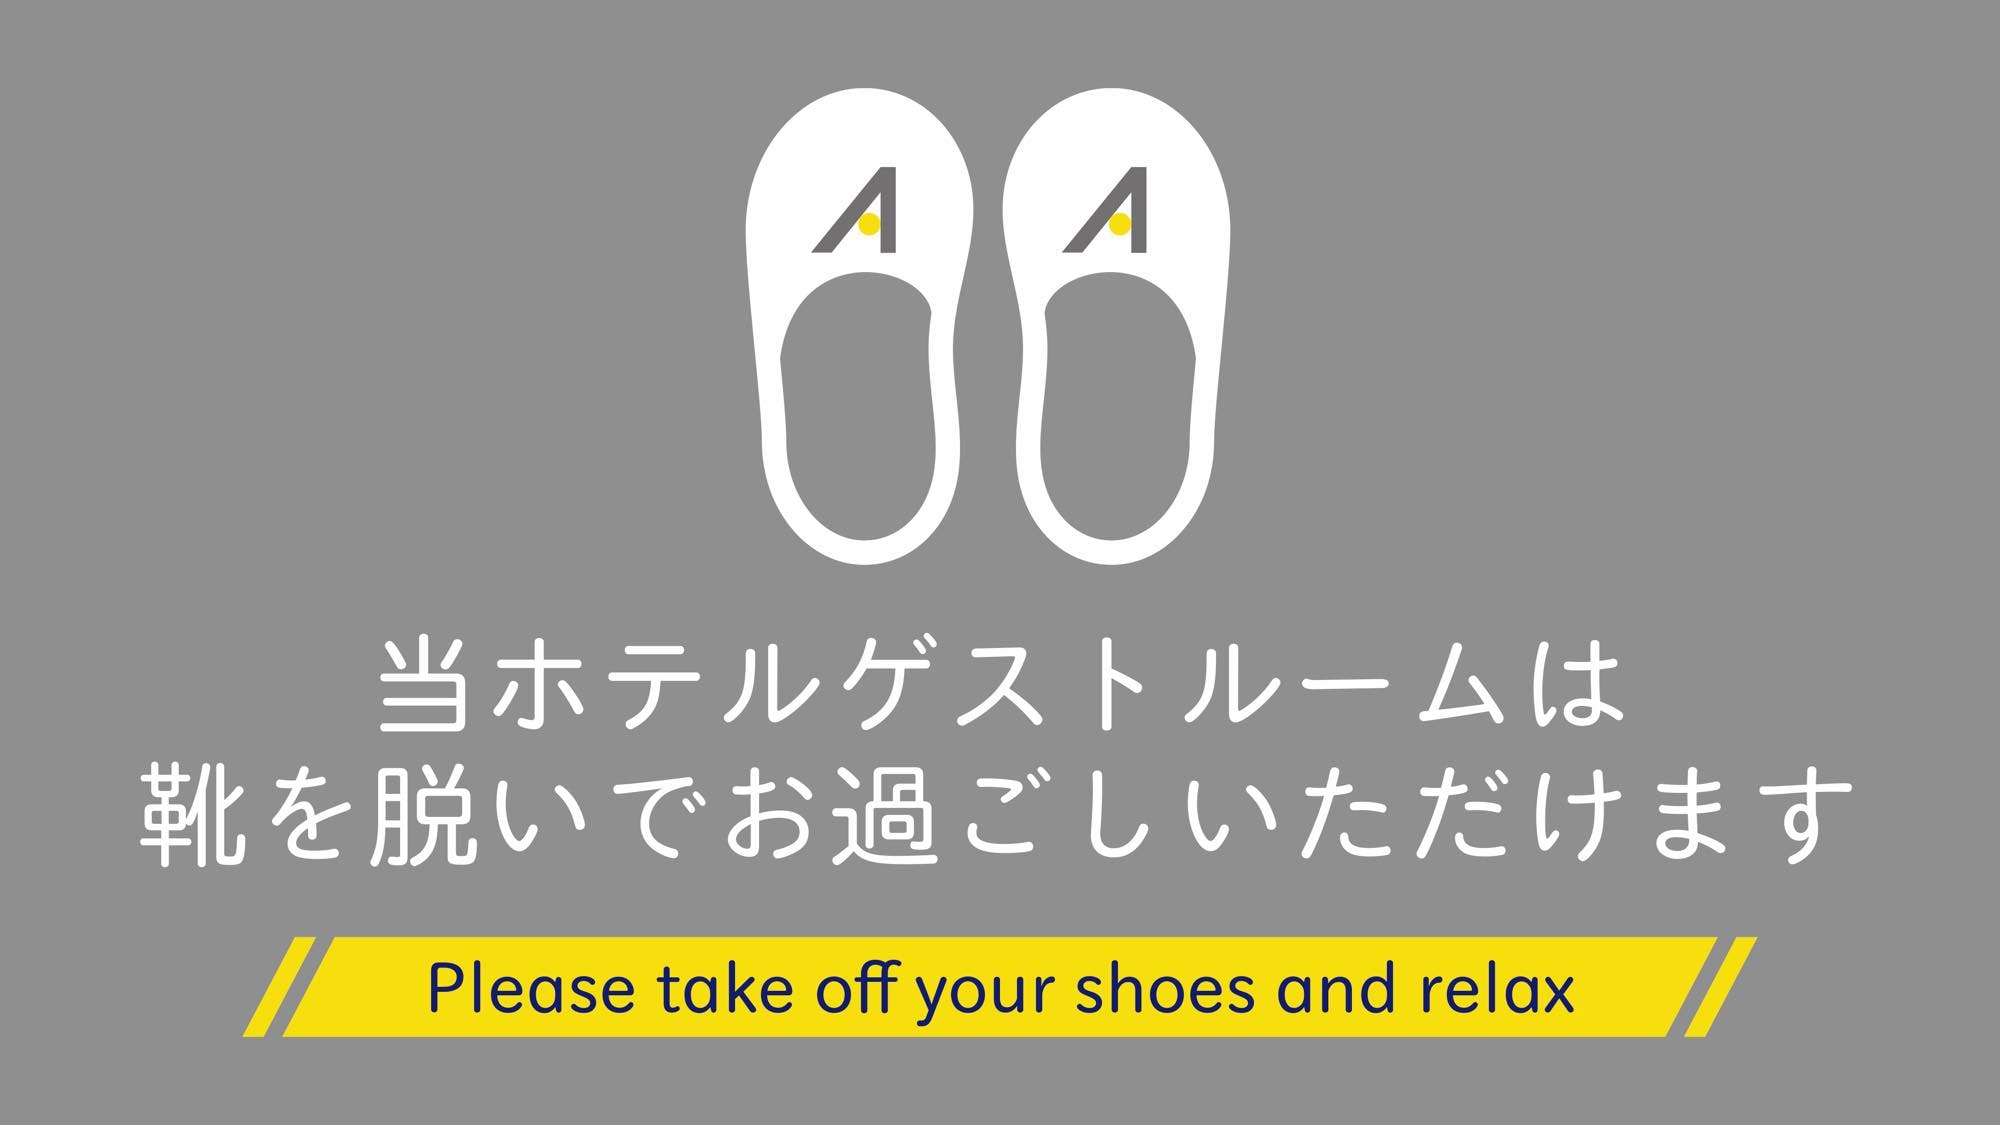 Take off your shoes and relax ♪